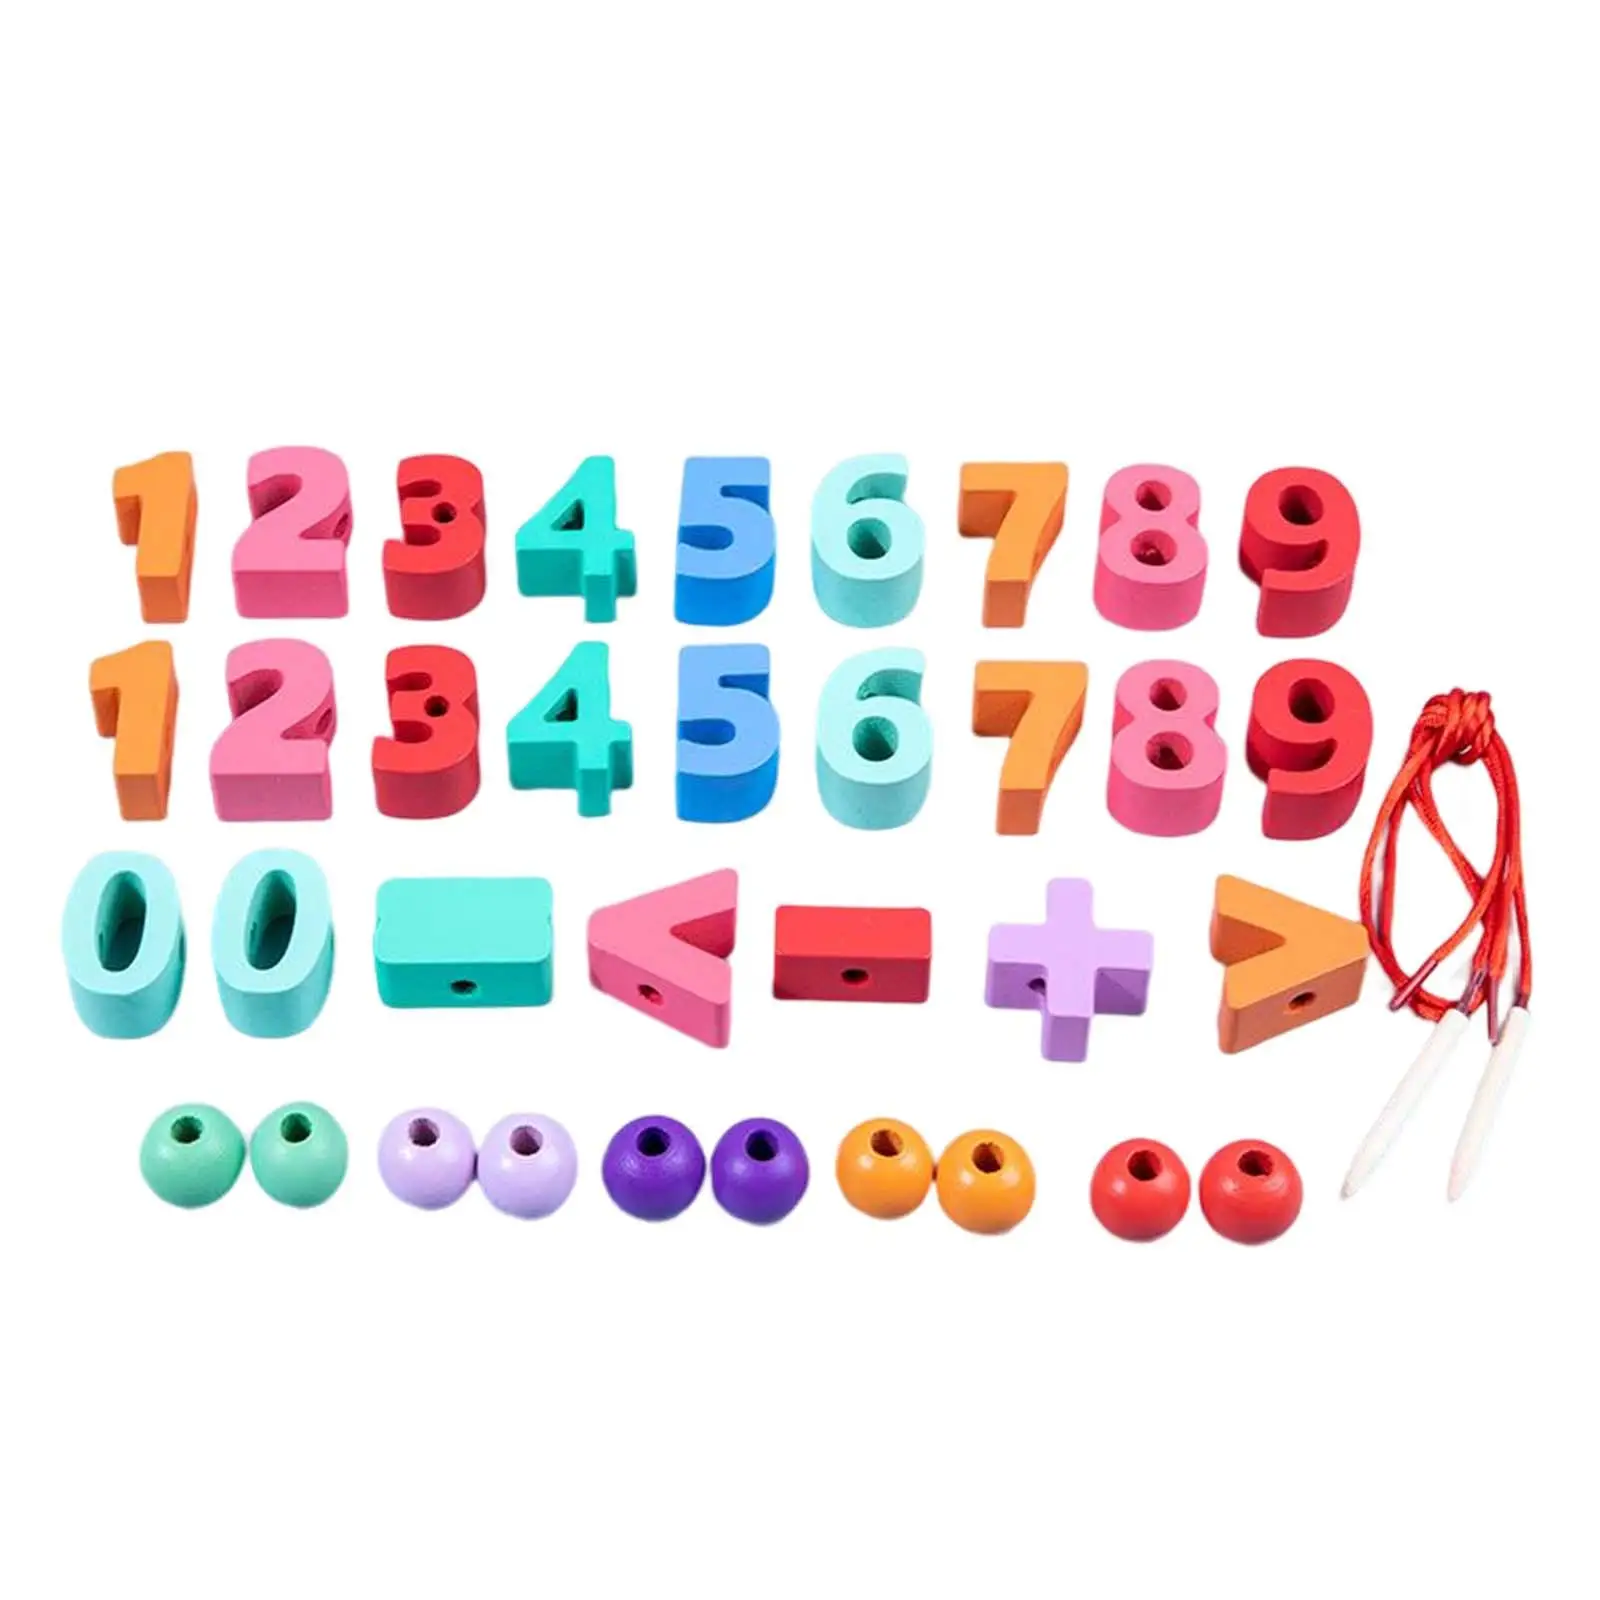 Threading Toys Fruits Animal Lacing Beads Lacing Beads Set for Birthday Gifts Shape Color Recognition